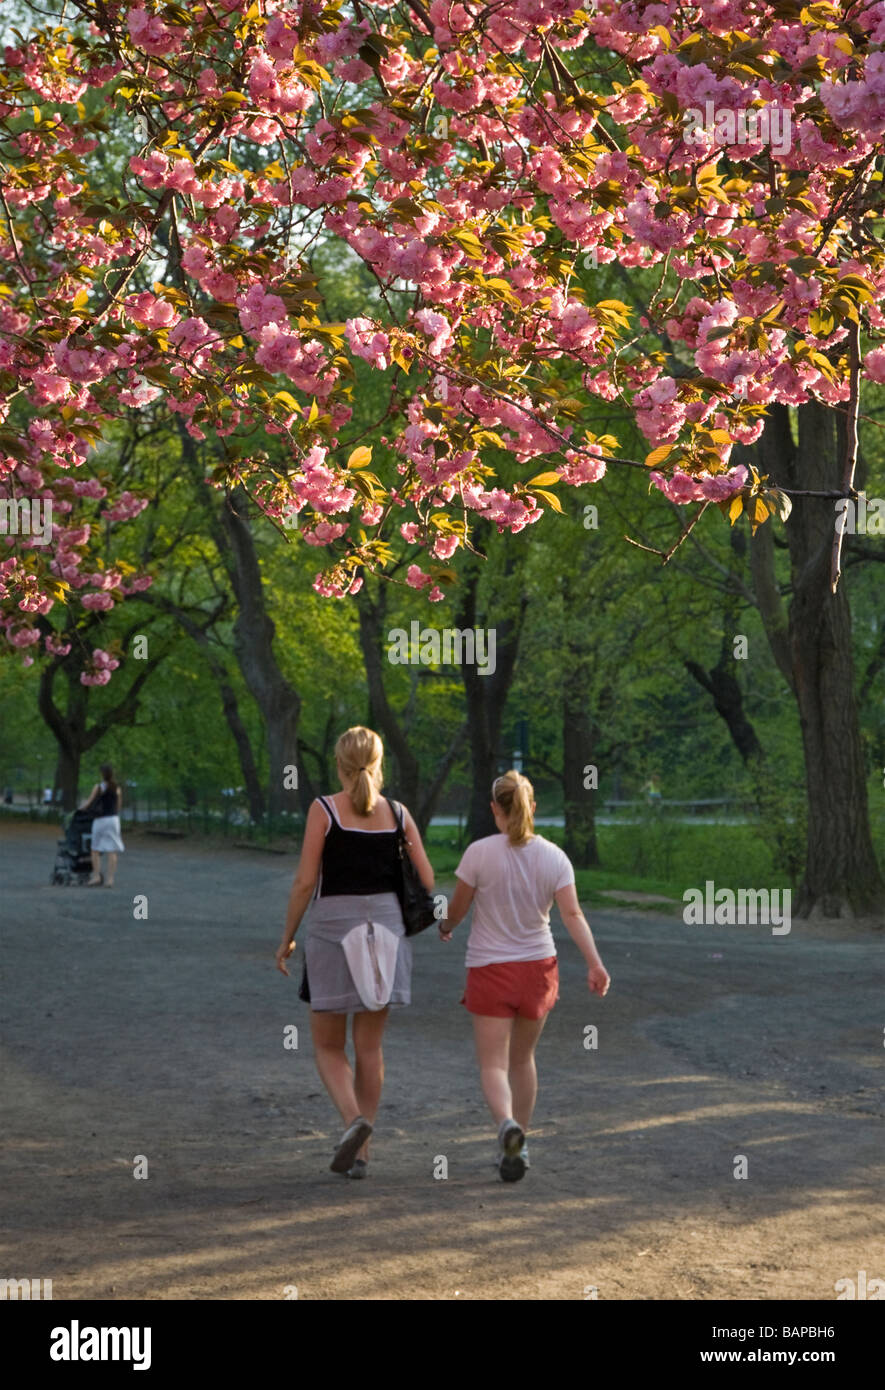 Walking in Central Park under the cherry blossoms Stock Photo